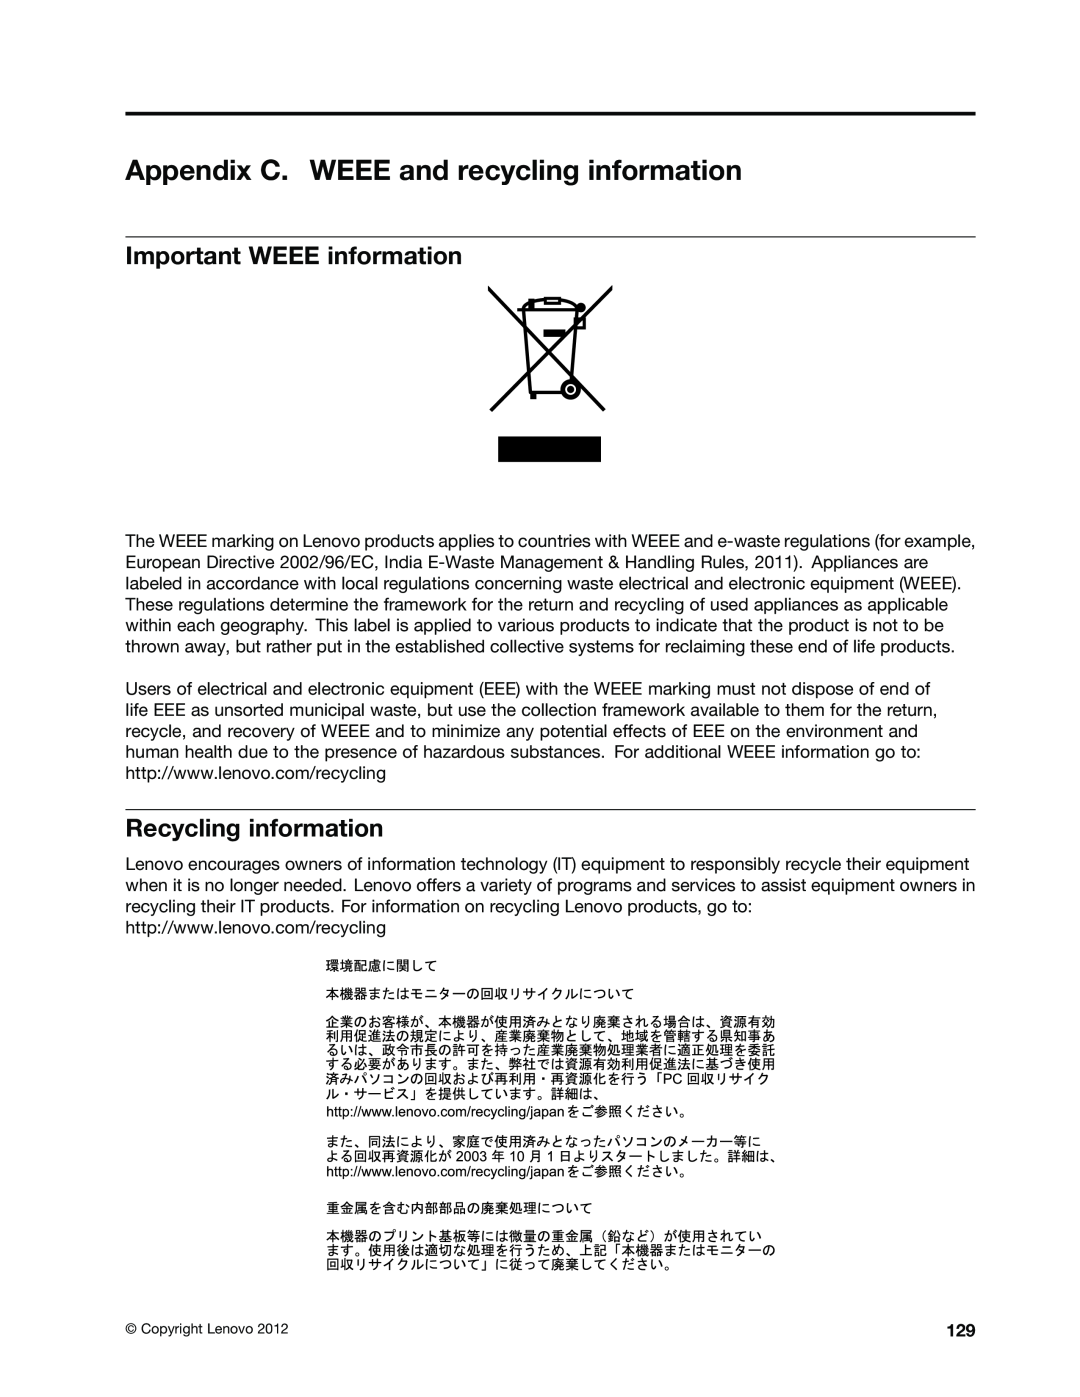 Lenovo 2111, 2112, 2110, 2011 Appendix C. WEEE and recycling information, Important WEEE information, Recycling information 